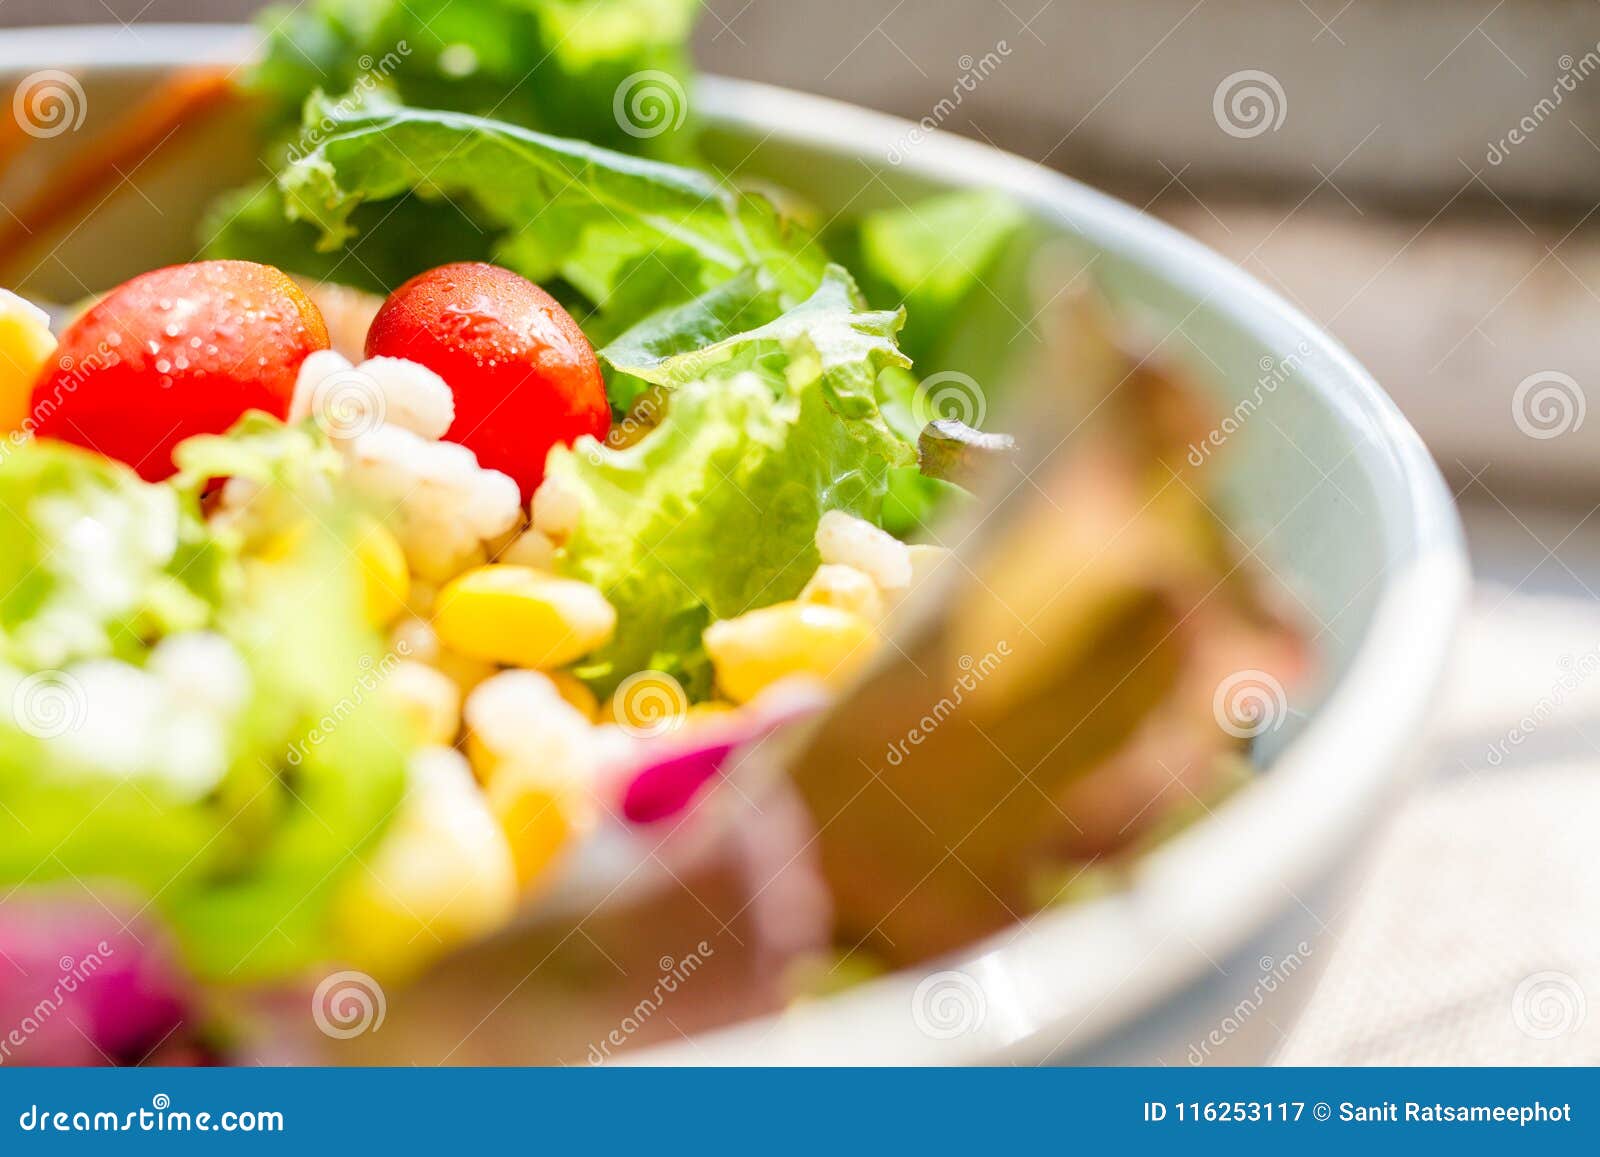 Menu Salad Home Made in Bowl on Brown Calico. Stock Image - Image of ...